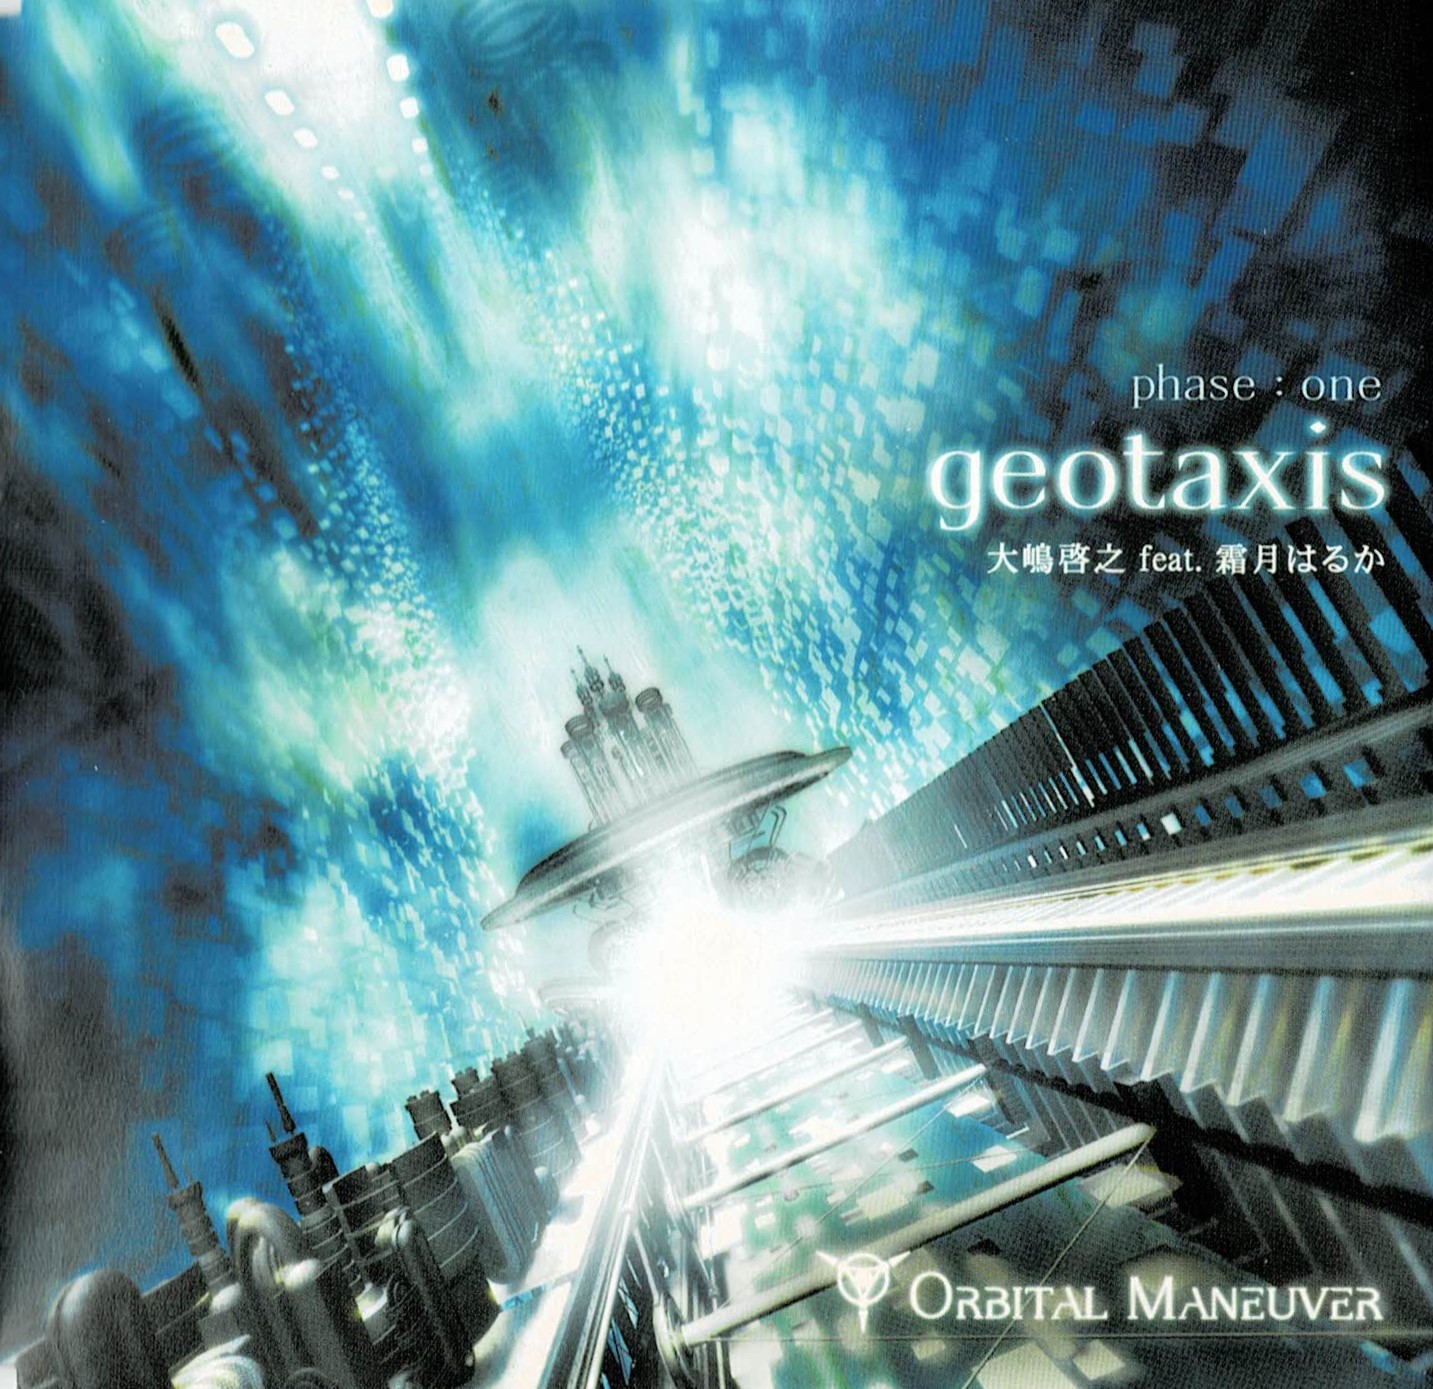 『ORBITAL MANEUVER phase one: geotaxis』の画像